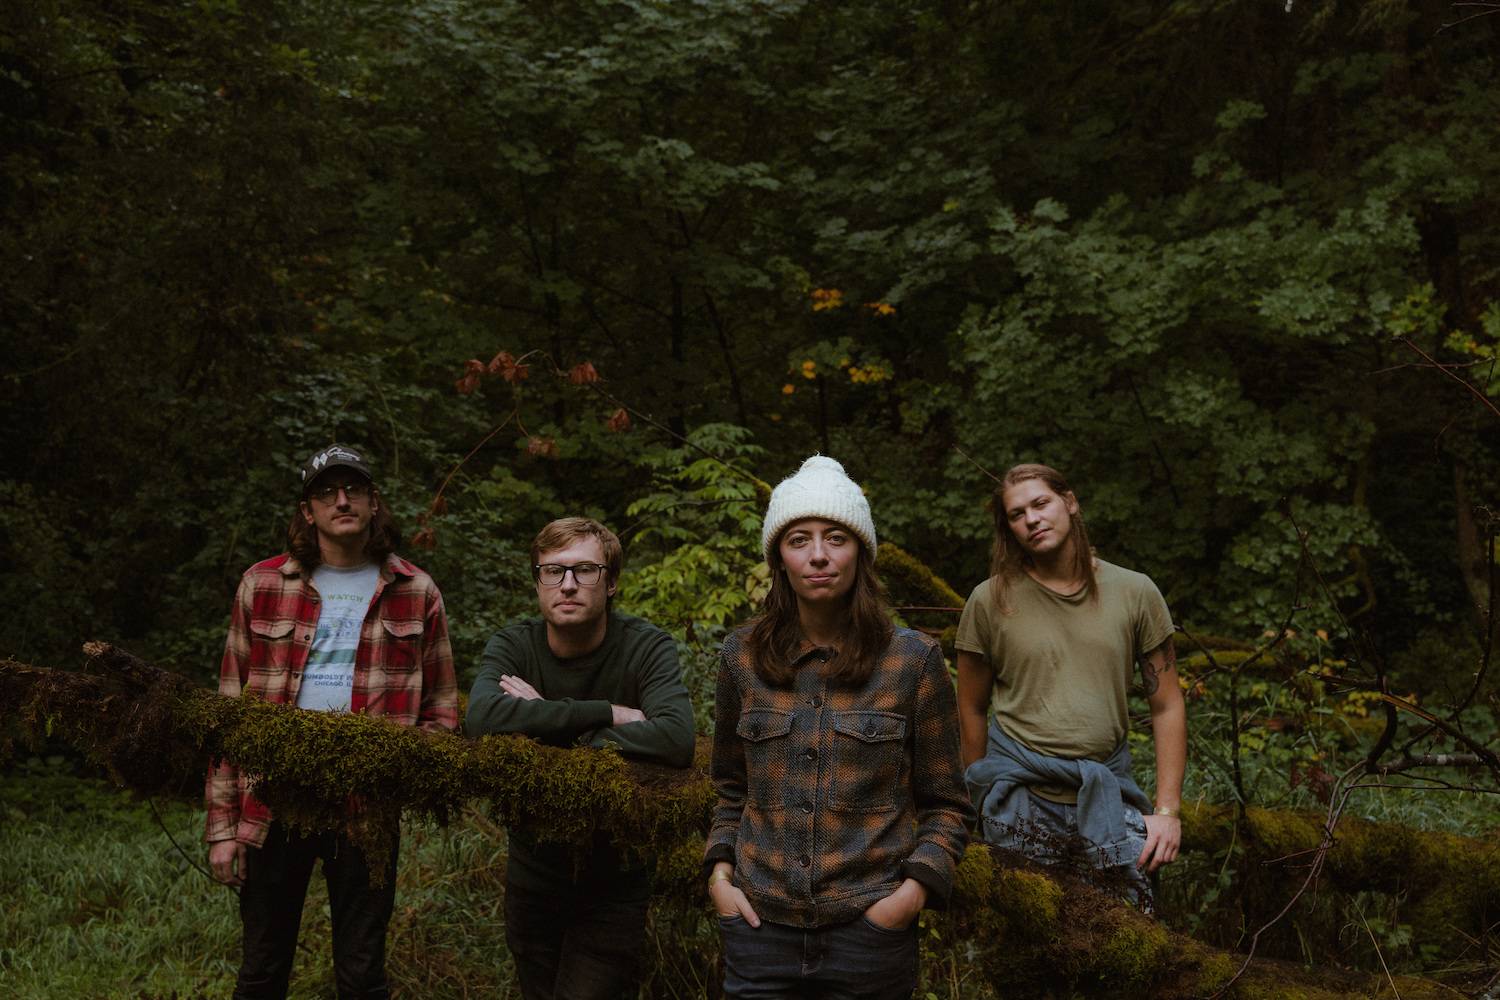 Chicago indie band Ratboys shot against a backdrop of luscious green trees